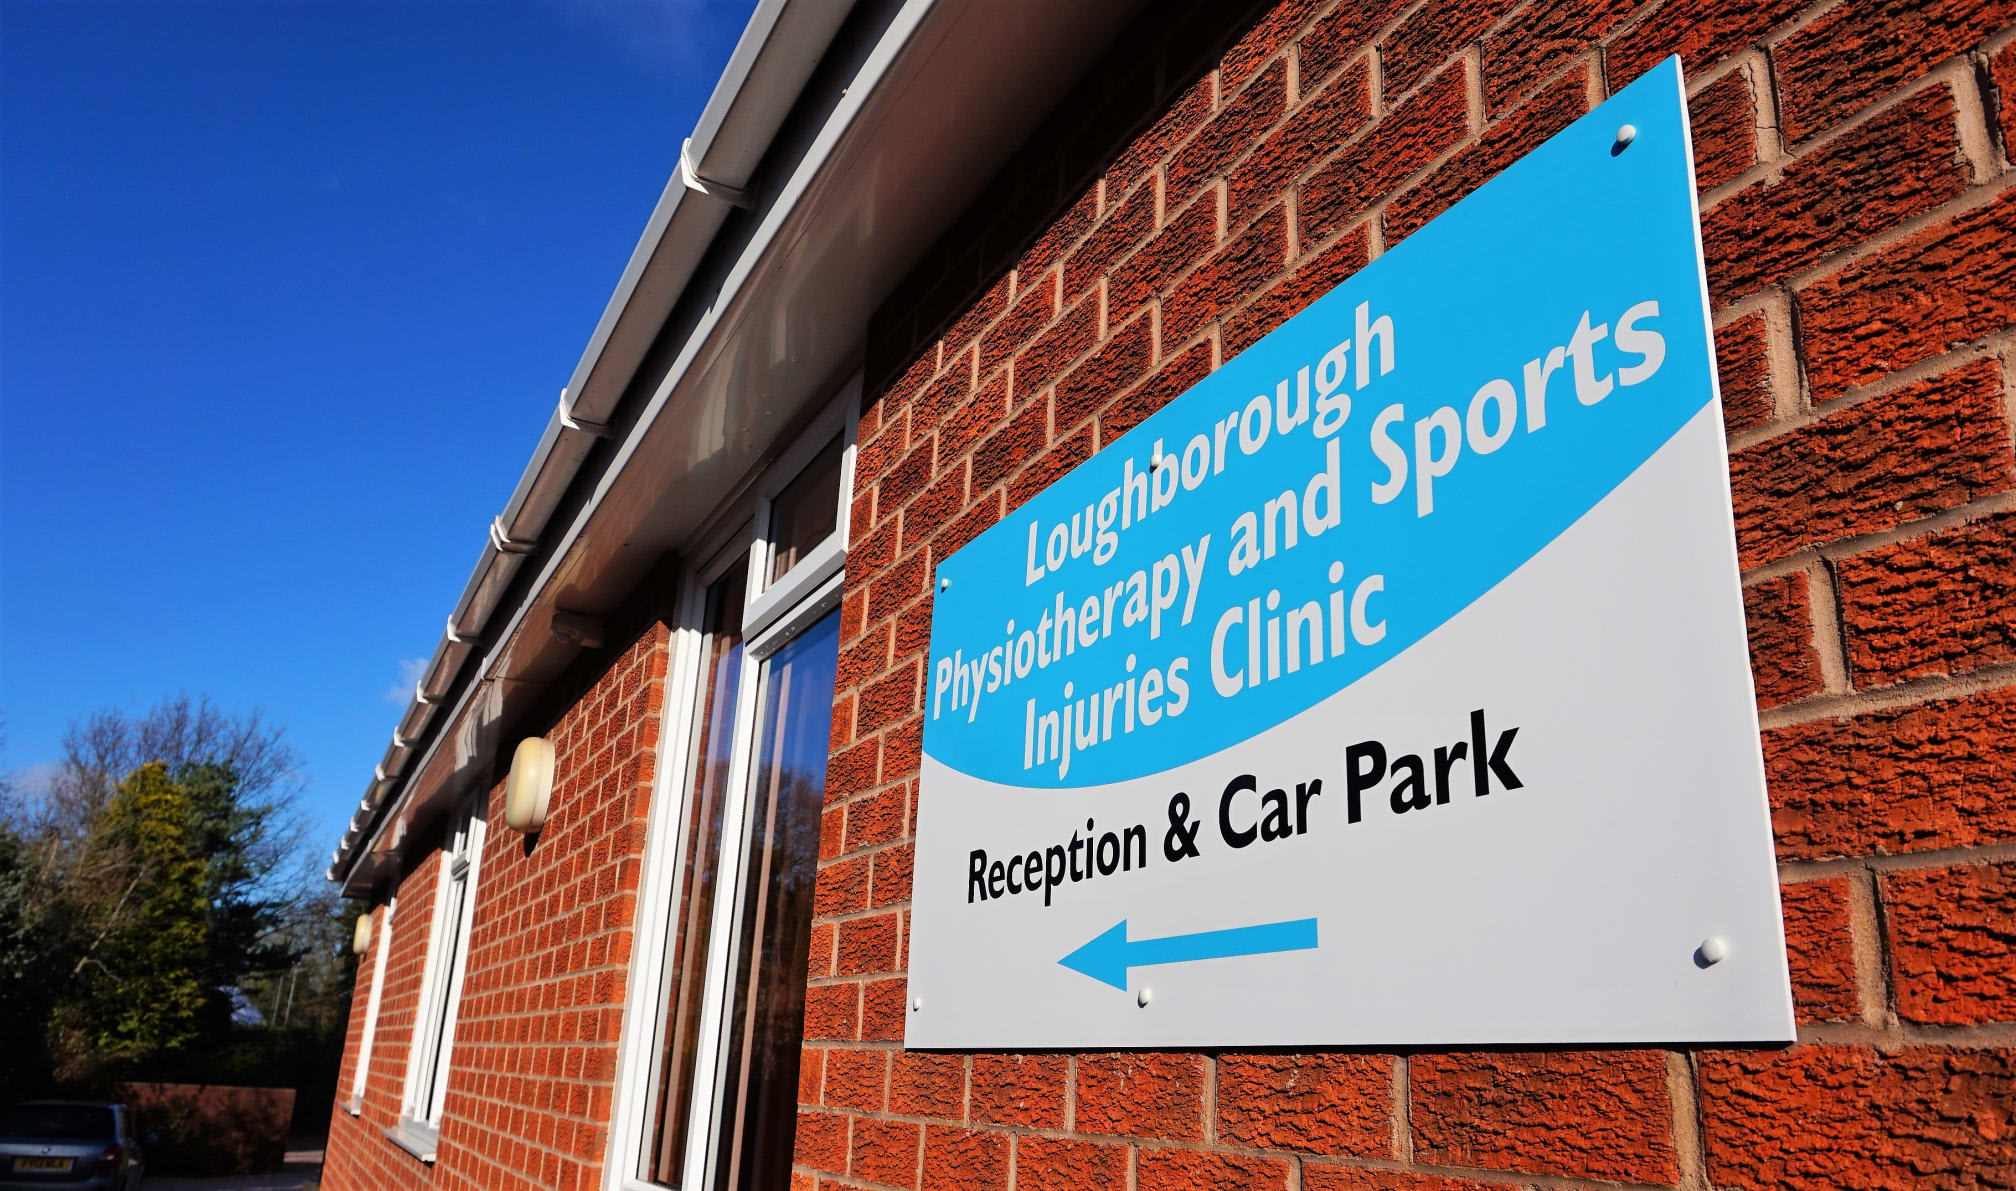 Images Loughborough Physiotherapy & Sports Injuries Clinic